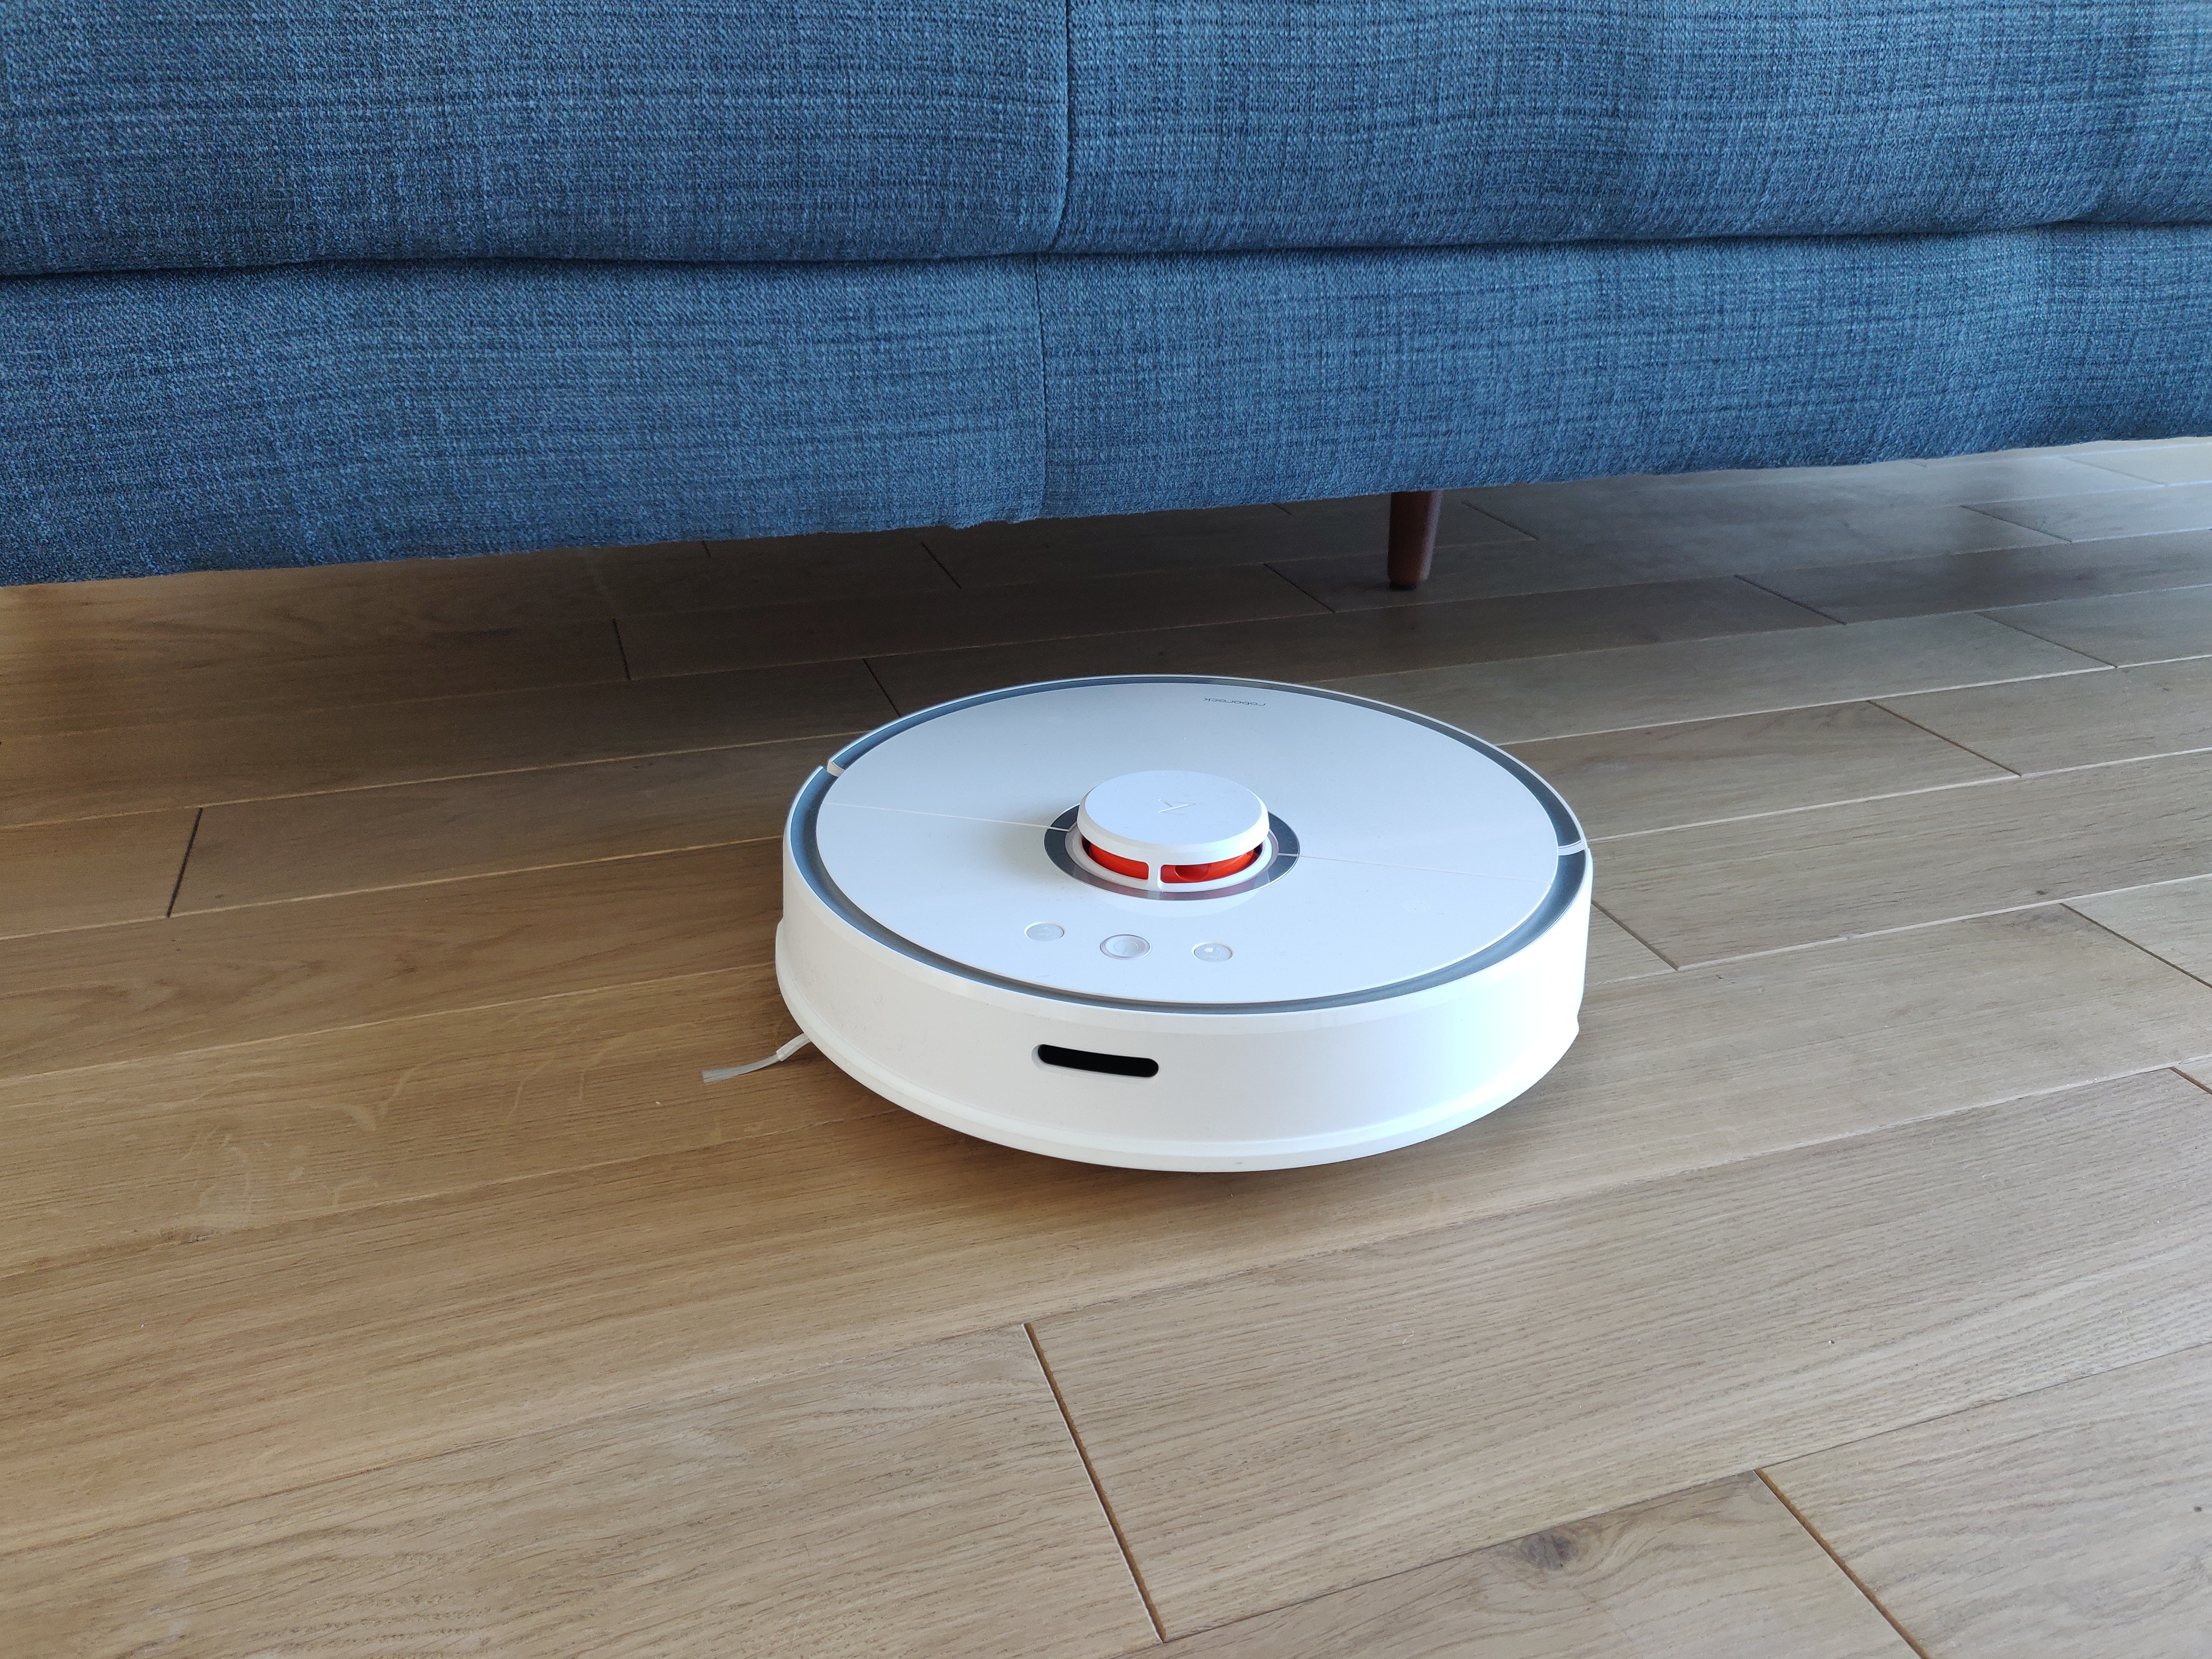 domesticate Get cold Seem TEST]-Xiaomi: Getting Started with the Xiaomi Roborock S50 - SYS Advisor